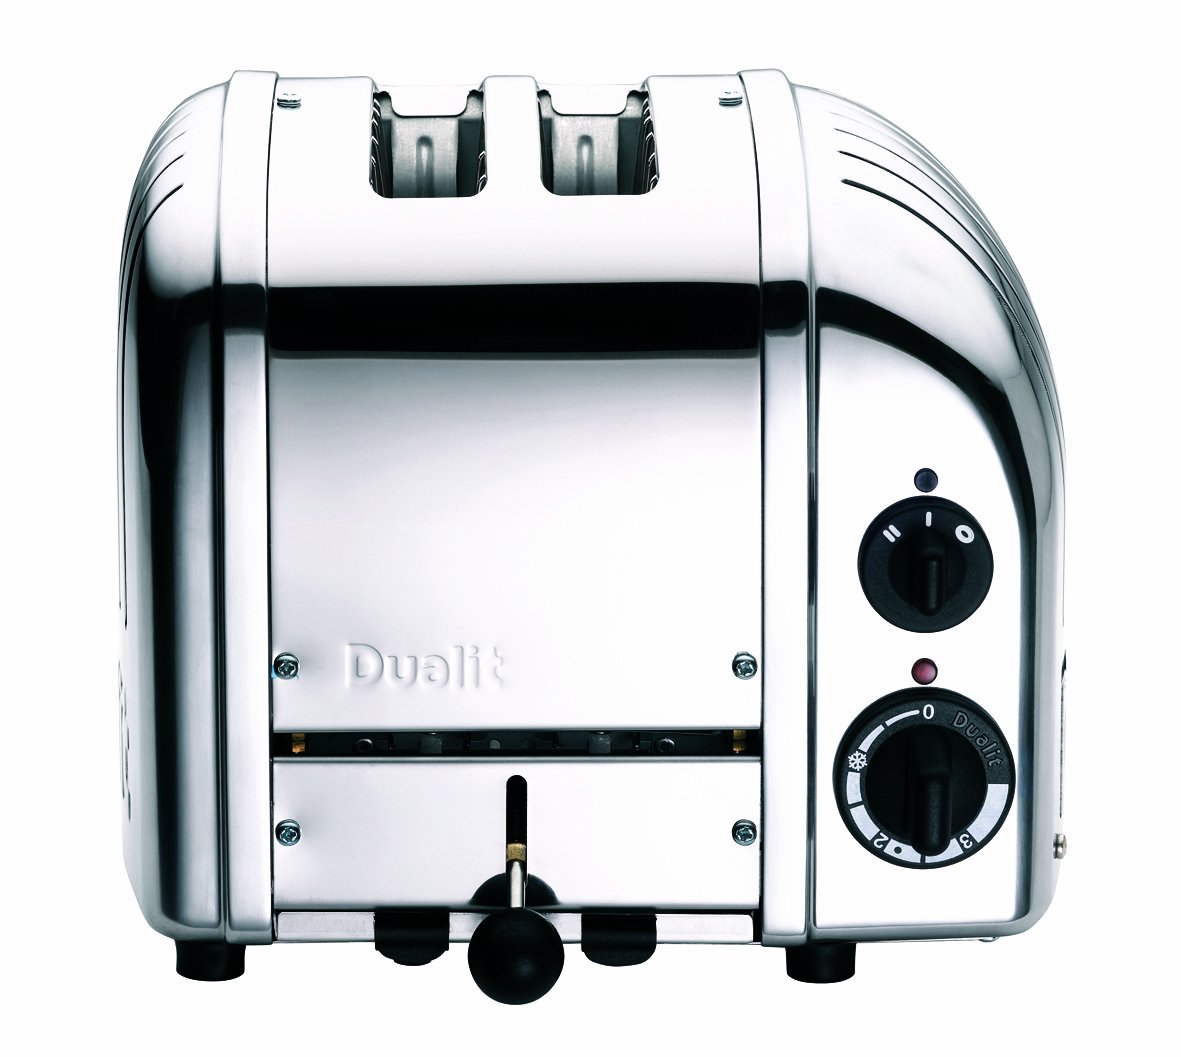 Dualit Classic Toasters